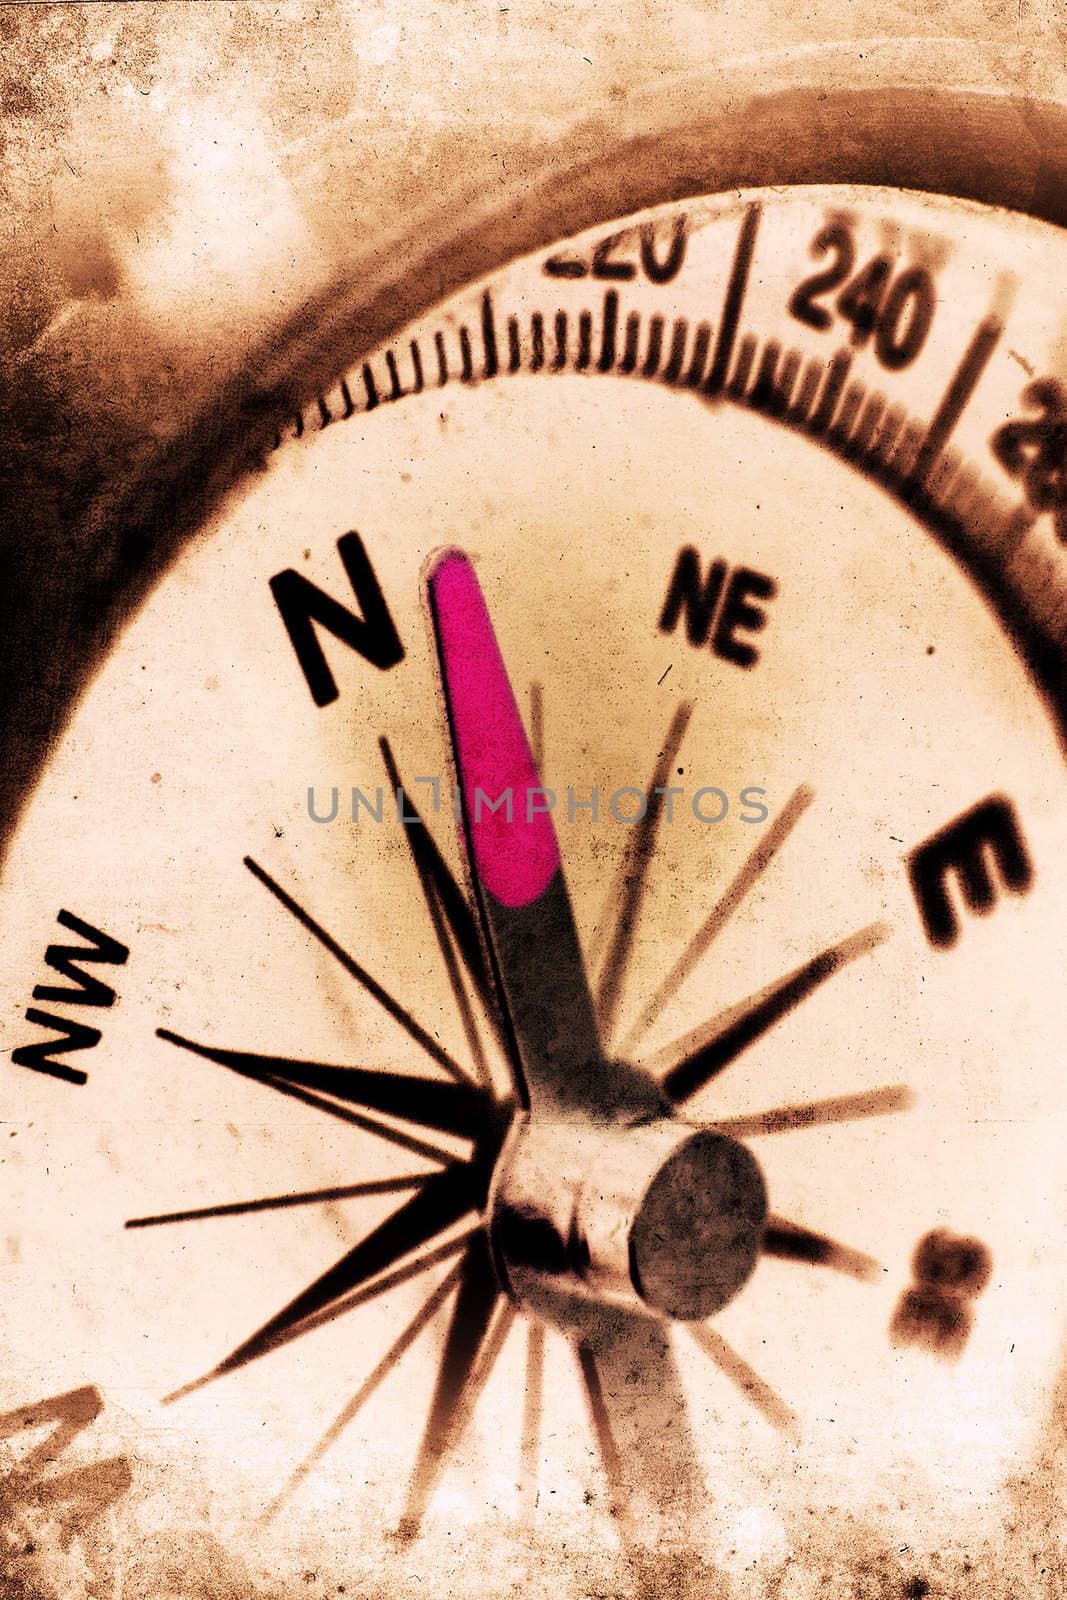 Retro look of compass showing the way to north